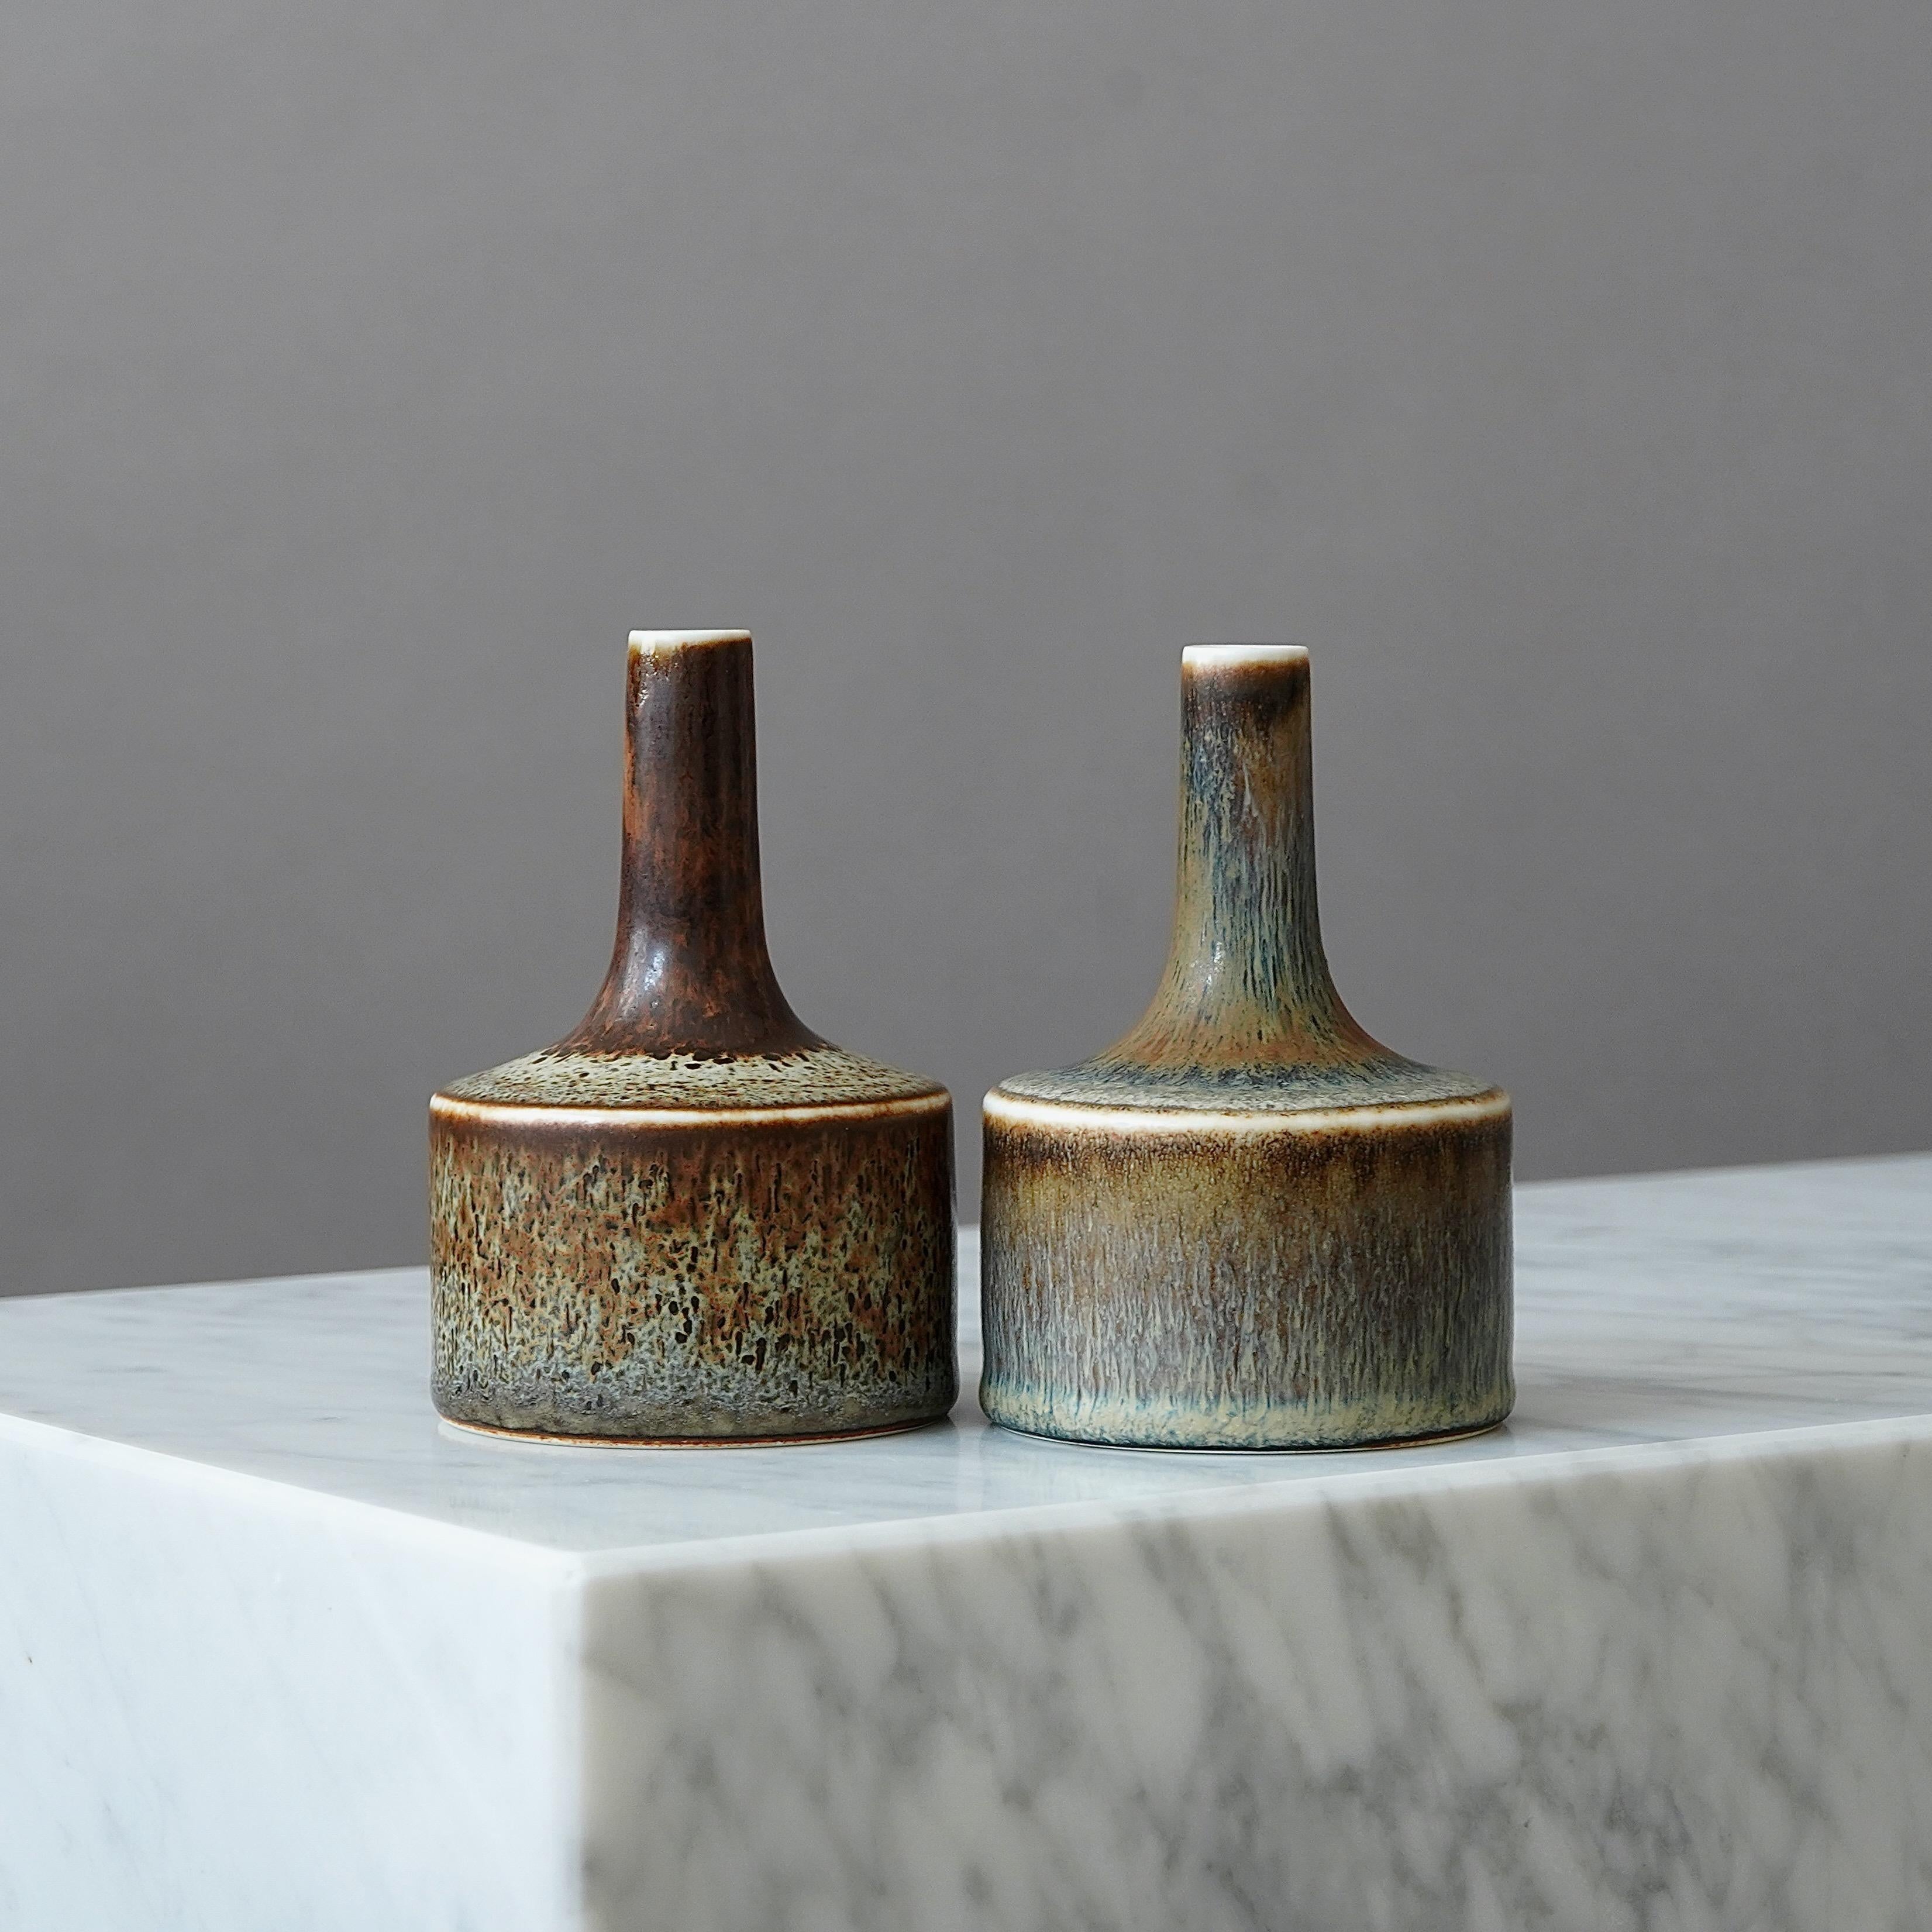 Glazed Pair of Stoneware Vases by Carl-Harry Stalhane, Rorstrand, Sweden, 1950s For Sale